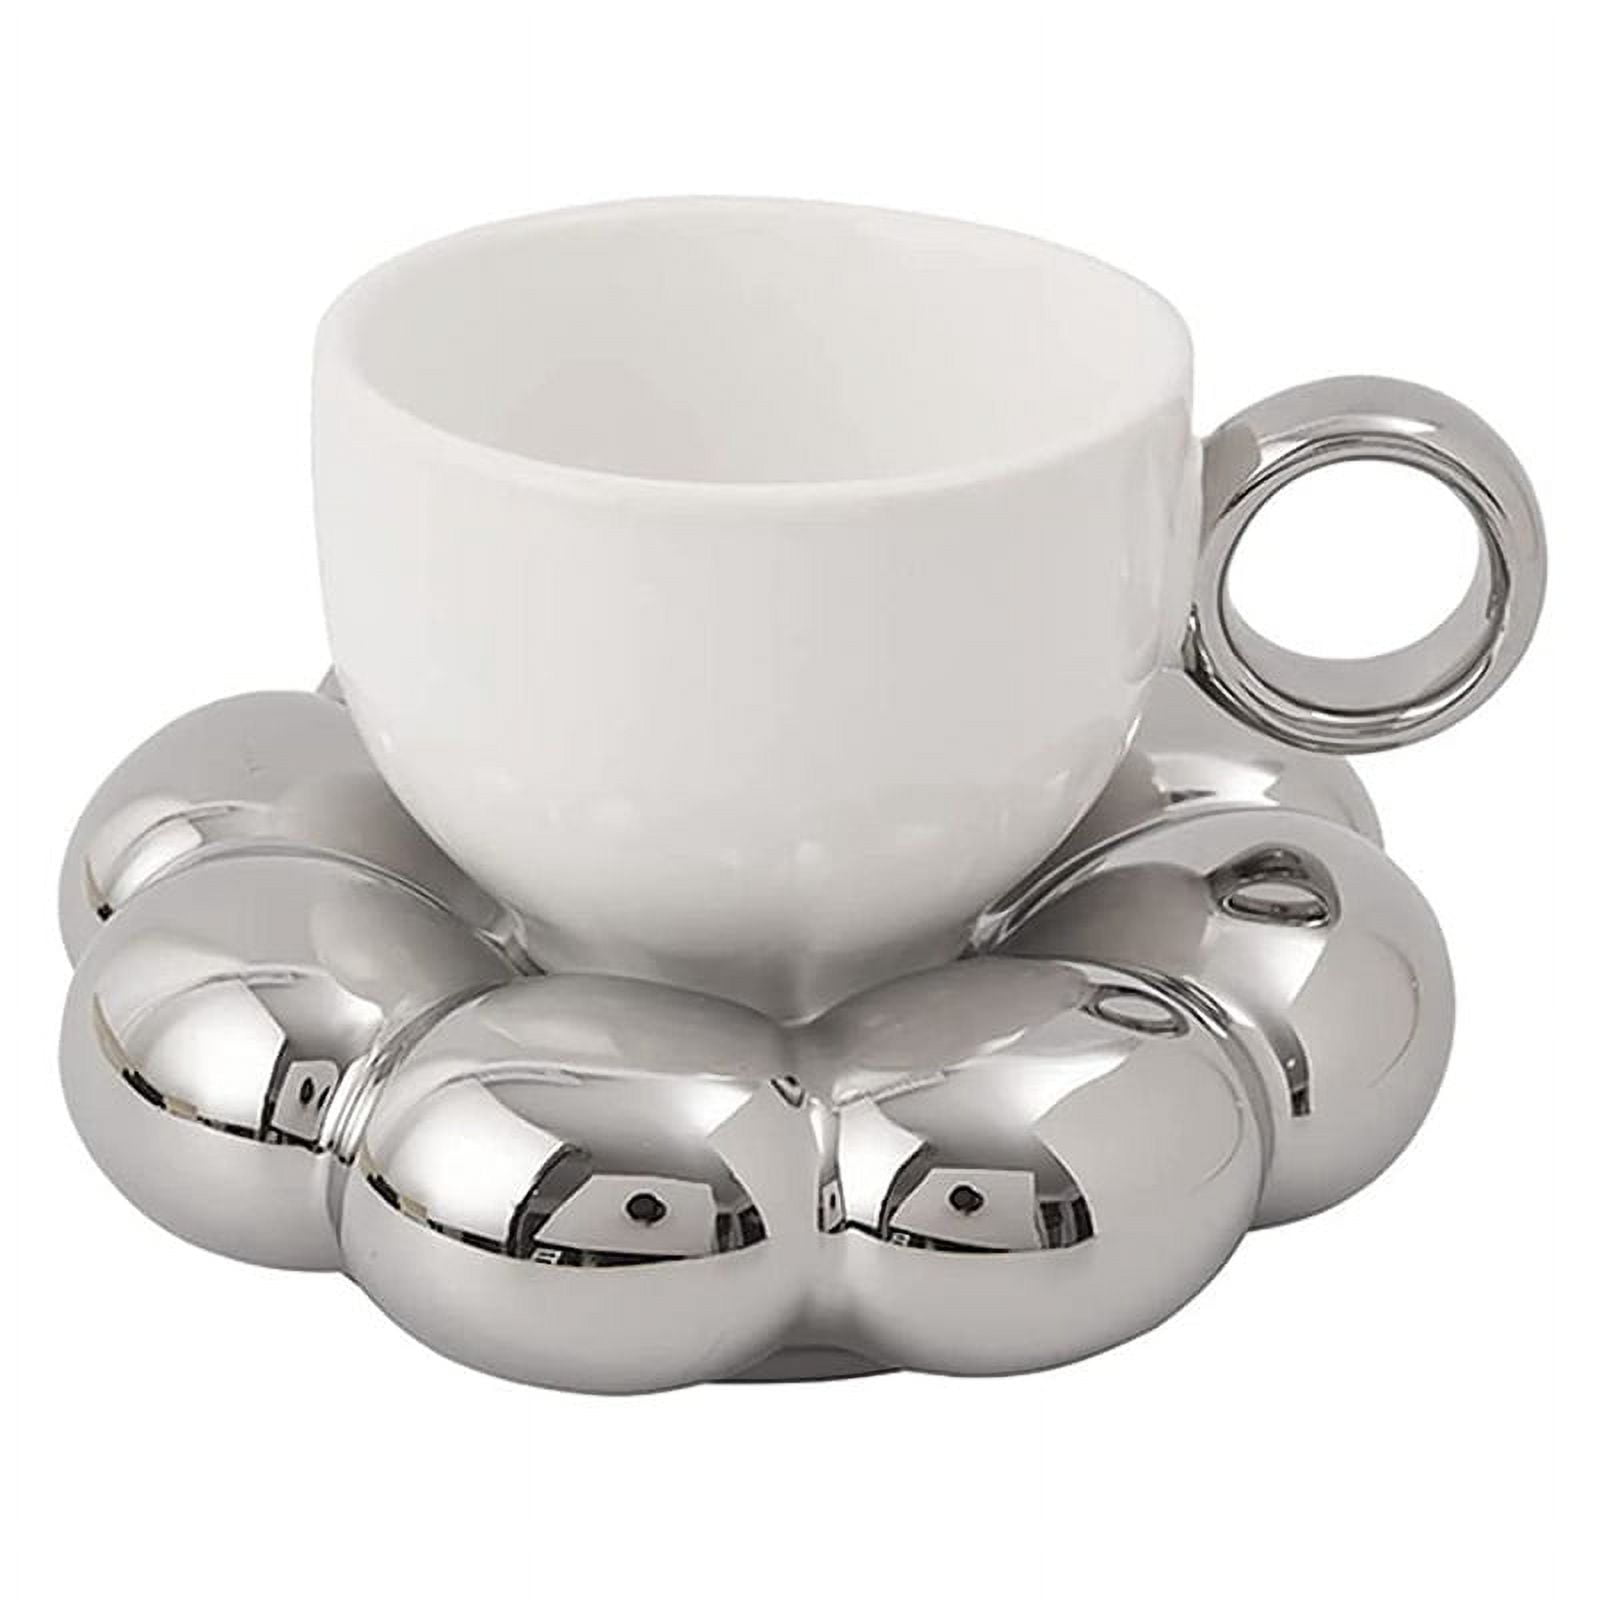 Qtmnekly Flower 6.7Oz Ceramic Silver Saucer & Set Set & Cup Saucer Coffee Cute Cups Cup with Latte Mug Sunflower Saucer Coffee